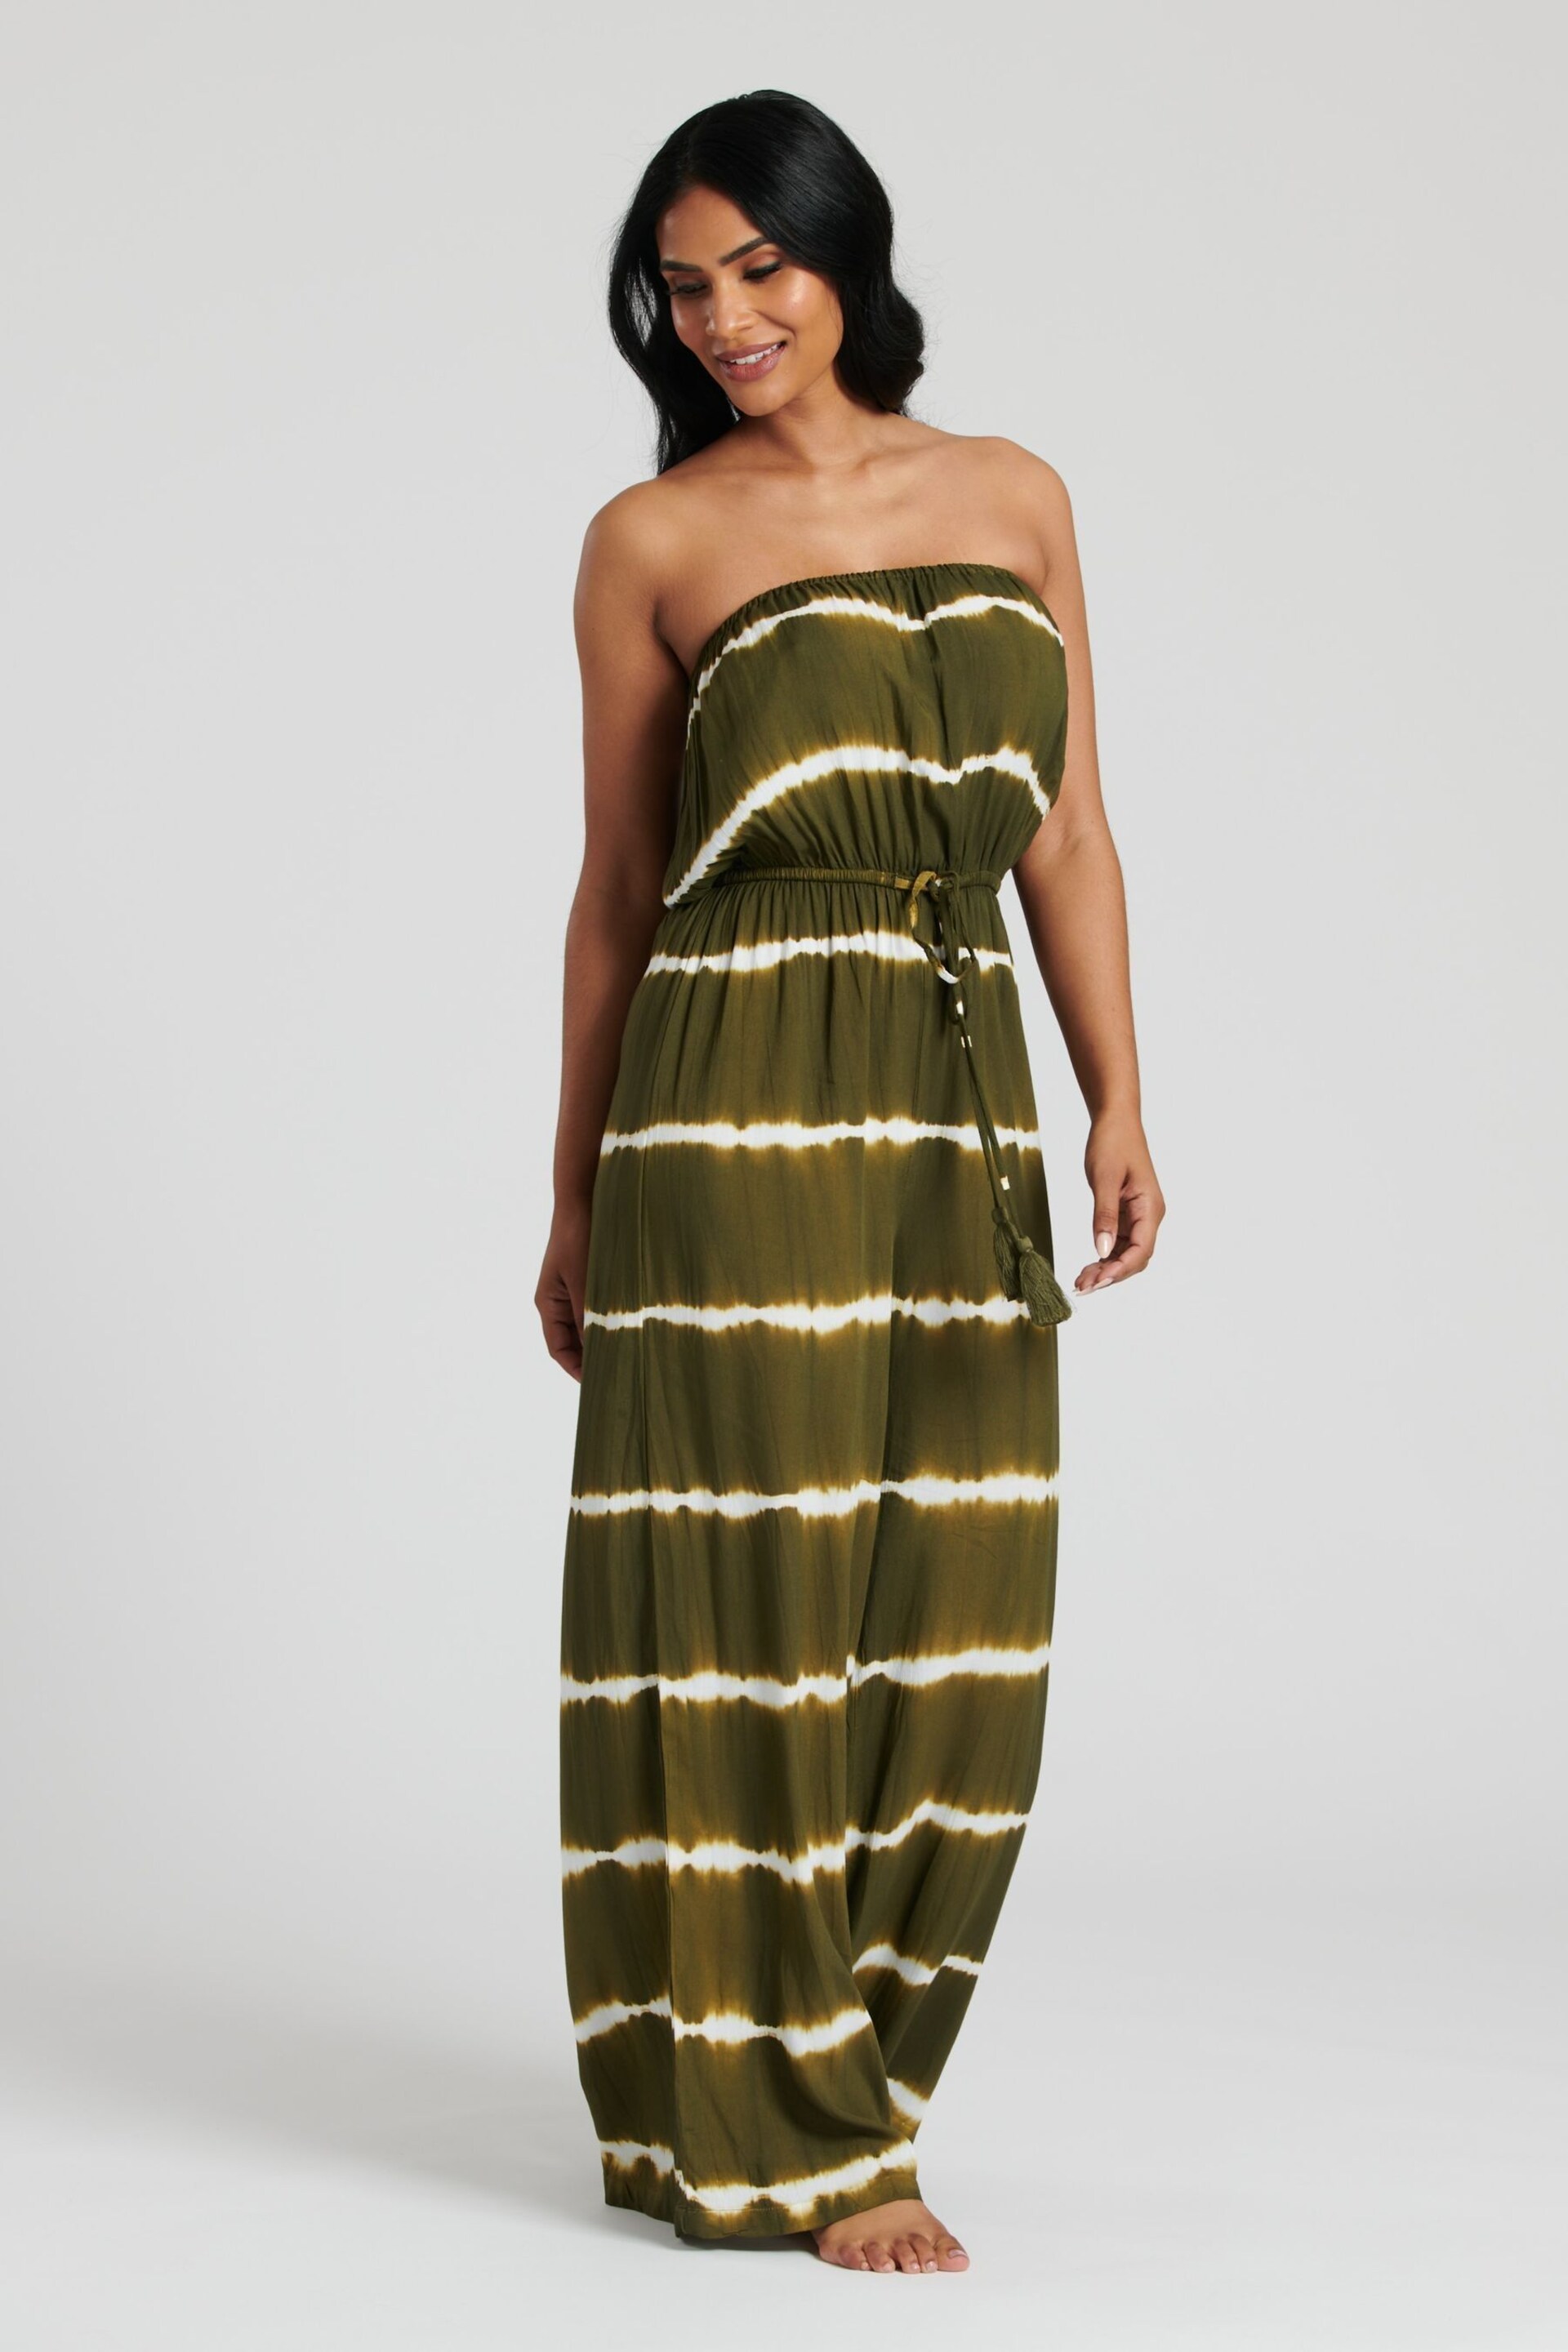 South Beach Green Tie Dye Strapless Jumpsuit - Image 3 of 5